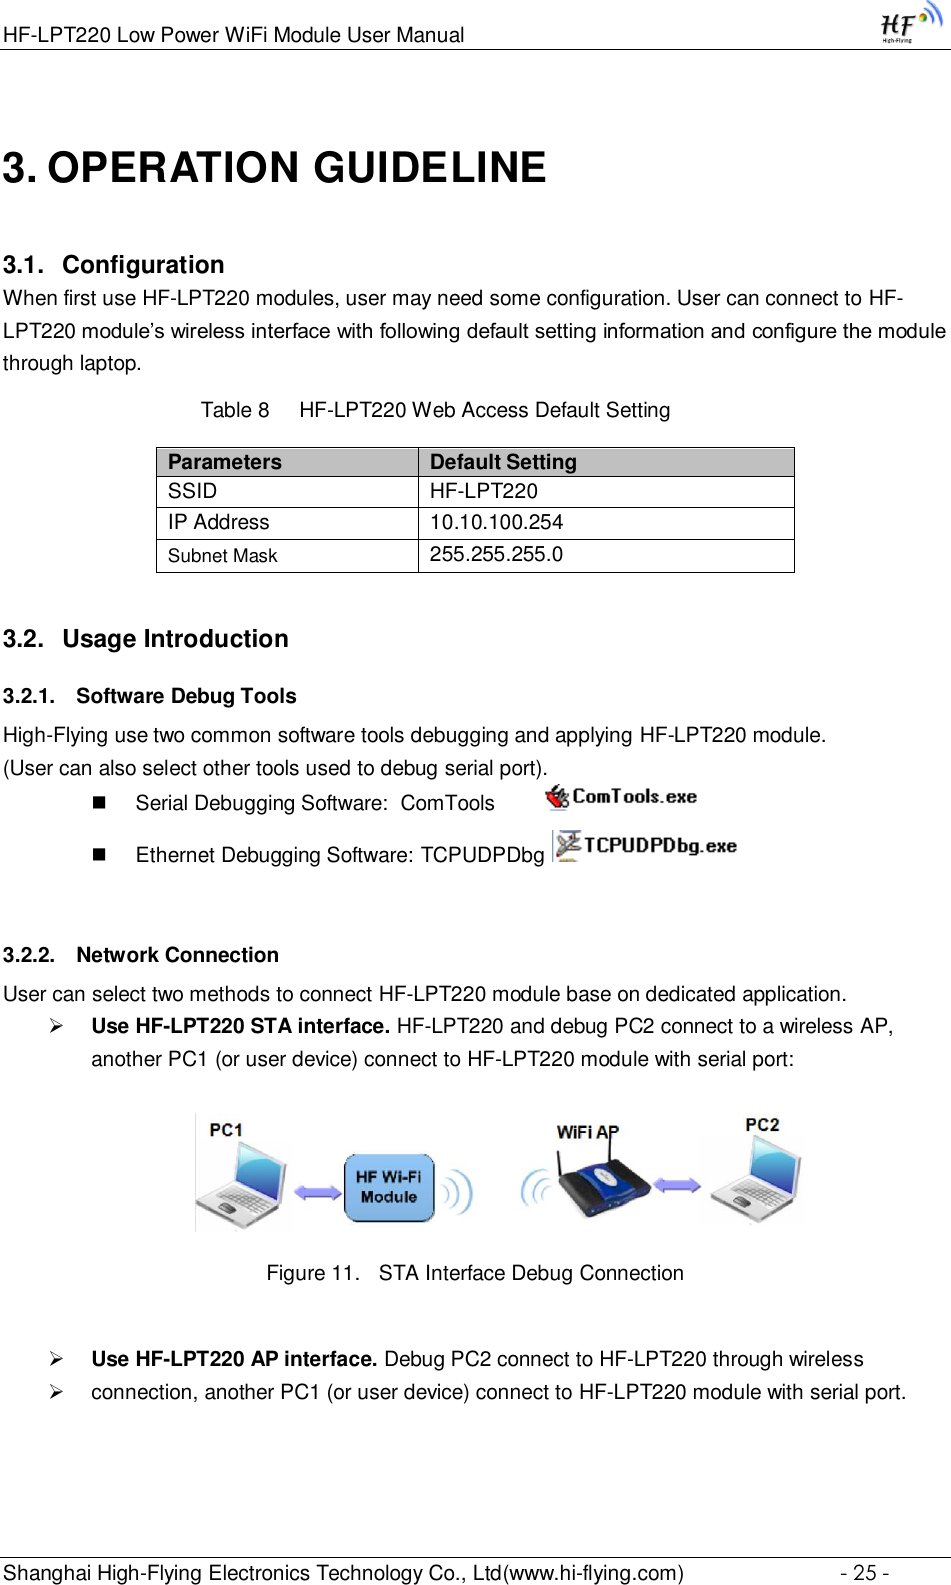 HF-LPT220 Low Power WiFi Module User Manual Shanghai High-Flying Electronics Technology Co., Ltd(www.hi-flying.com)  - 25 - 3. OPERATION GUIDELINE 3.1. Configuration When first use HF-LPT220 modules, user may need some configuration. User can connect to HF-LPT220 module’s wireless interface with following default setting information and configure the module through laptop.           Table 8     HF-LPT220 Web Access Default Setting Parameters Default Setting SSID HF-LPT220 IP Address 10.10.100.254 Subnet Mask 255.255.255.0 3.2. Usage Introduction 3.2.1. Software Debug Tools High-Flying use two common software tools debugging and applying HF-LPT220 module.  (User can also select other tools used to debug serial port).  Serial Debugging Software:  ComTools           Ethernet Debugging Software: TCPUDPDbg    3.2.2. Network Connection User can select two methods to connect HF-LPT220 module base on dedicated application.  Use HF-LPT220 STA interface. HF-LPT220 and debug PC2 connect to a wireless AP, another PC1 (or user device) connect to HF-LPT220 module with serial port:   Figure 11. STA Interface Debug Connection   Use HF-LPT220 AP interface. Debug PC2 connect to HF-LPT220 through wireless   connection, another PC1 (or user device) connect to HF-LPT220 module with serial port. 